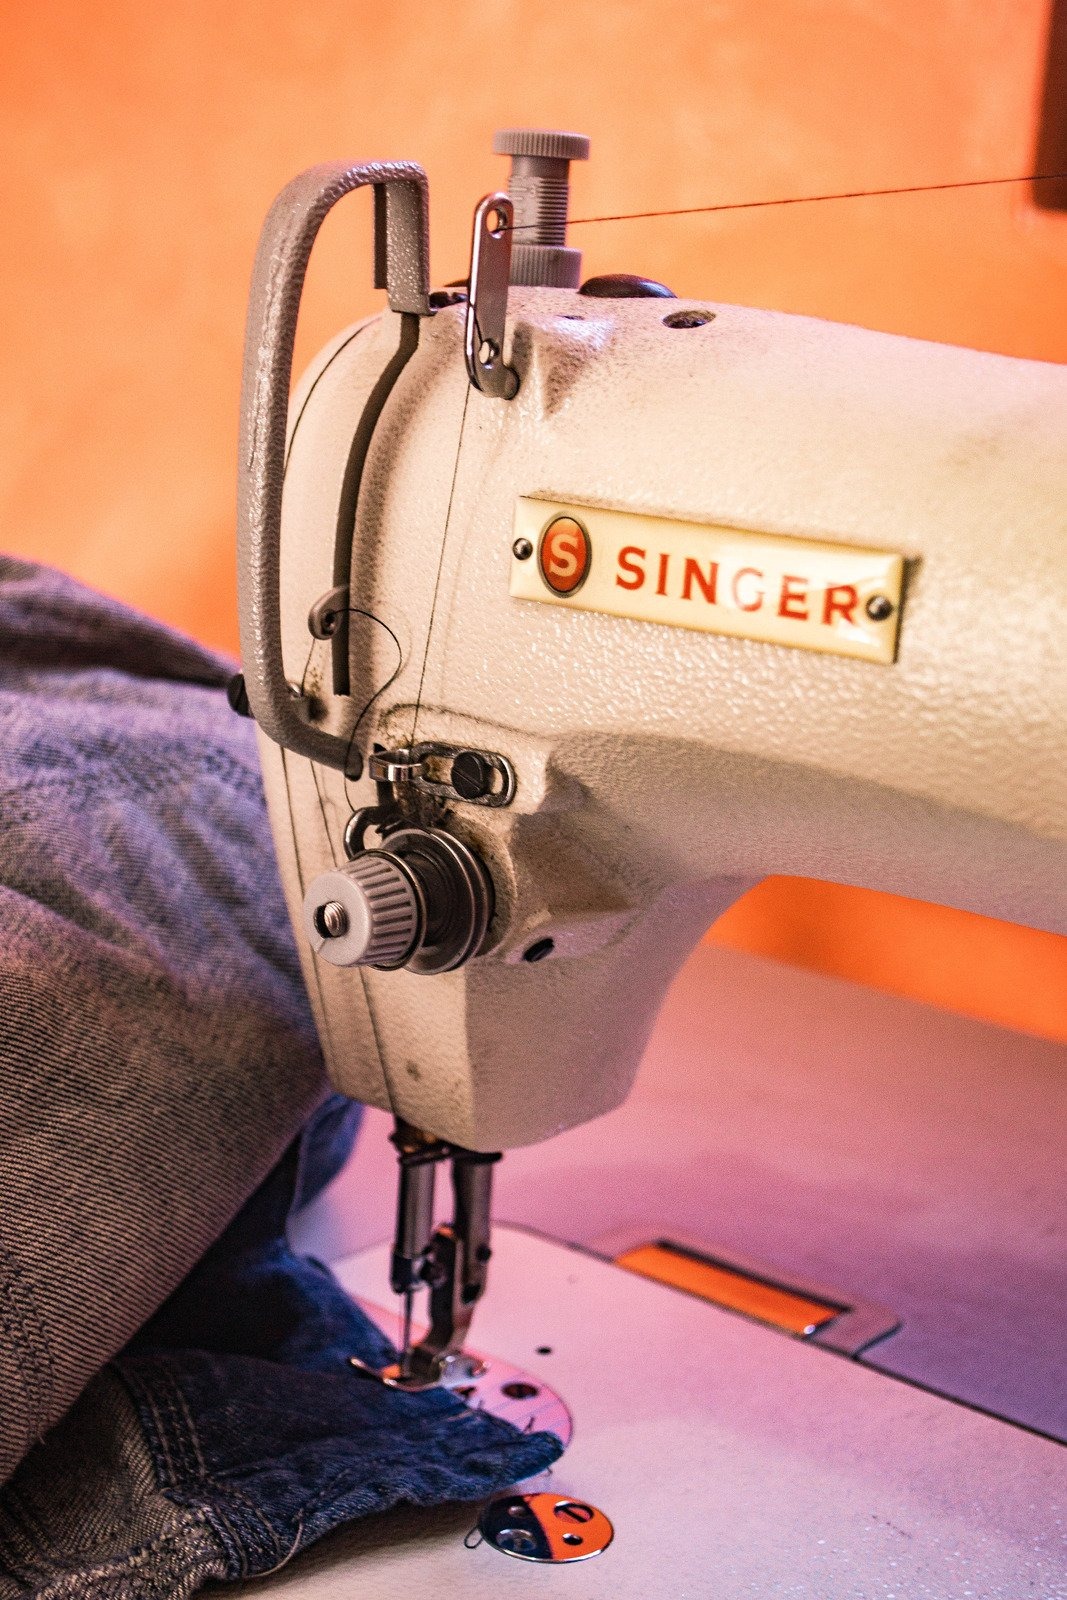 Overview of Singer Sewing Machines